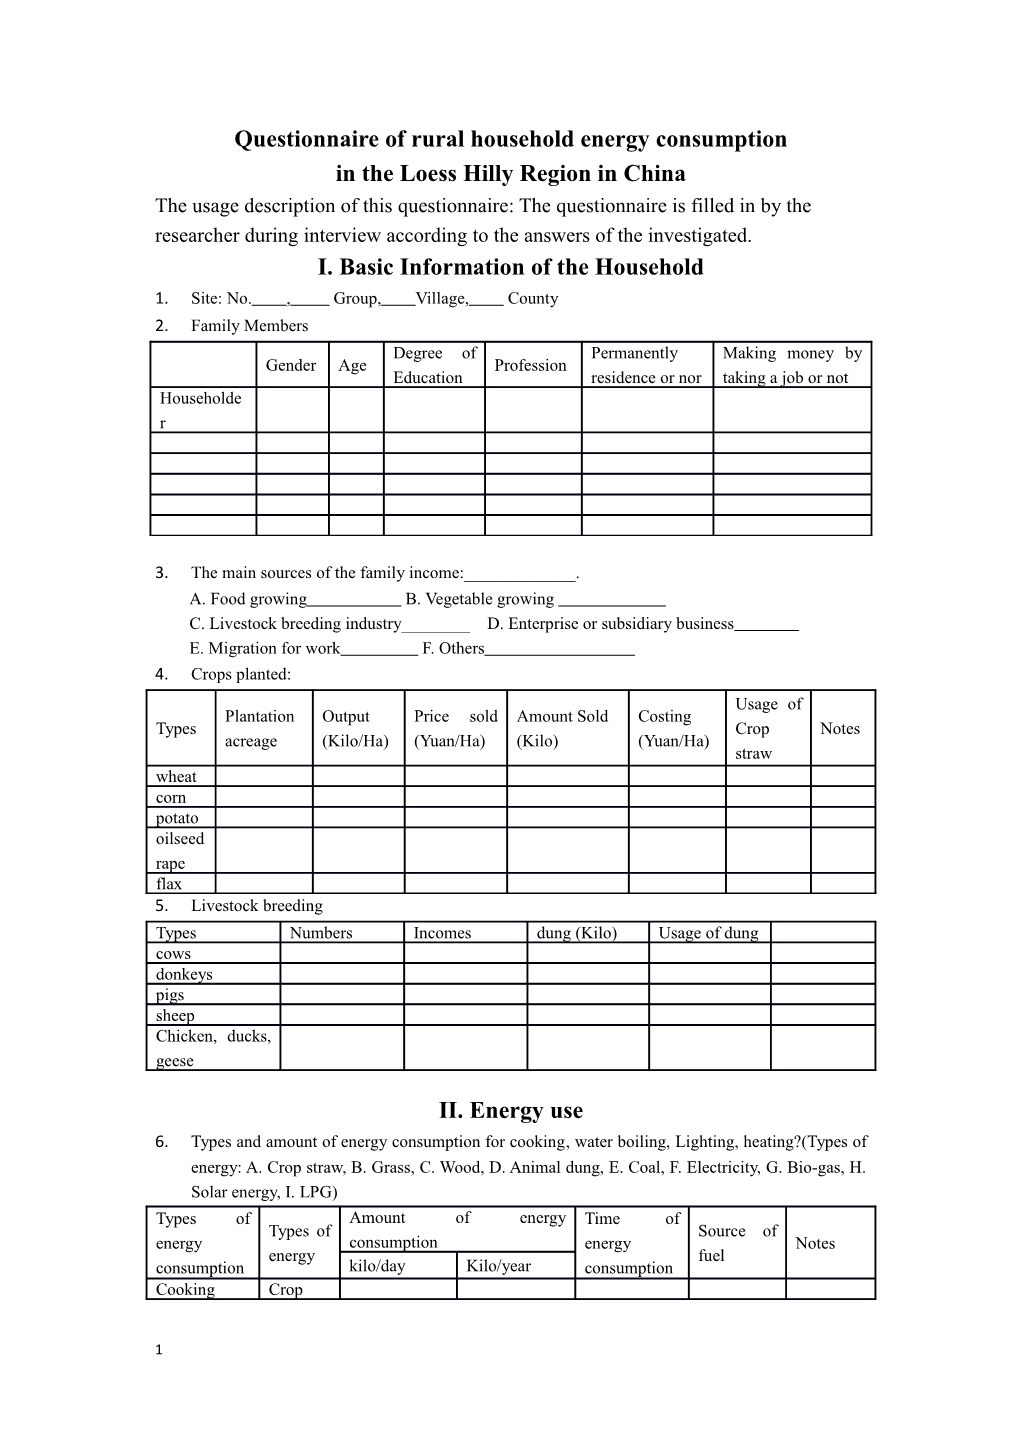 Questionnaire of Rural Household Energy Consumption in the Loess Hilly Region in China